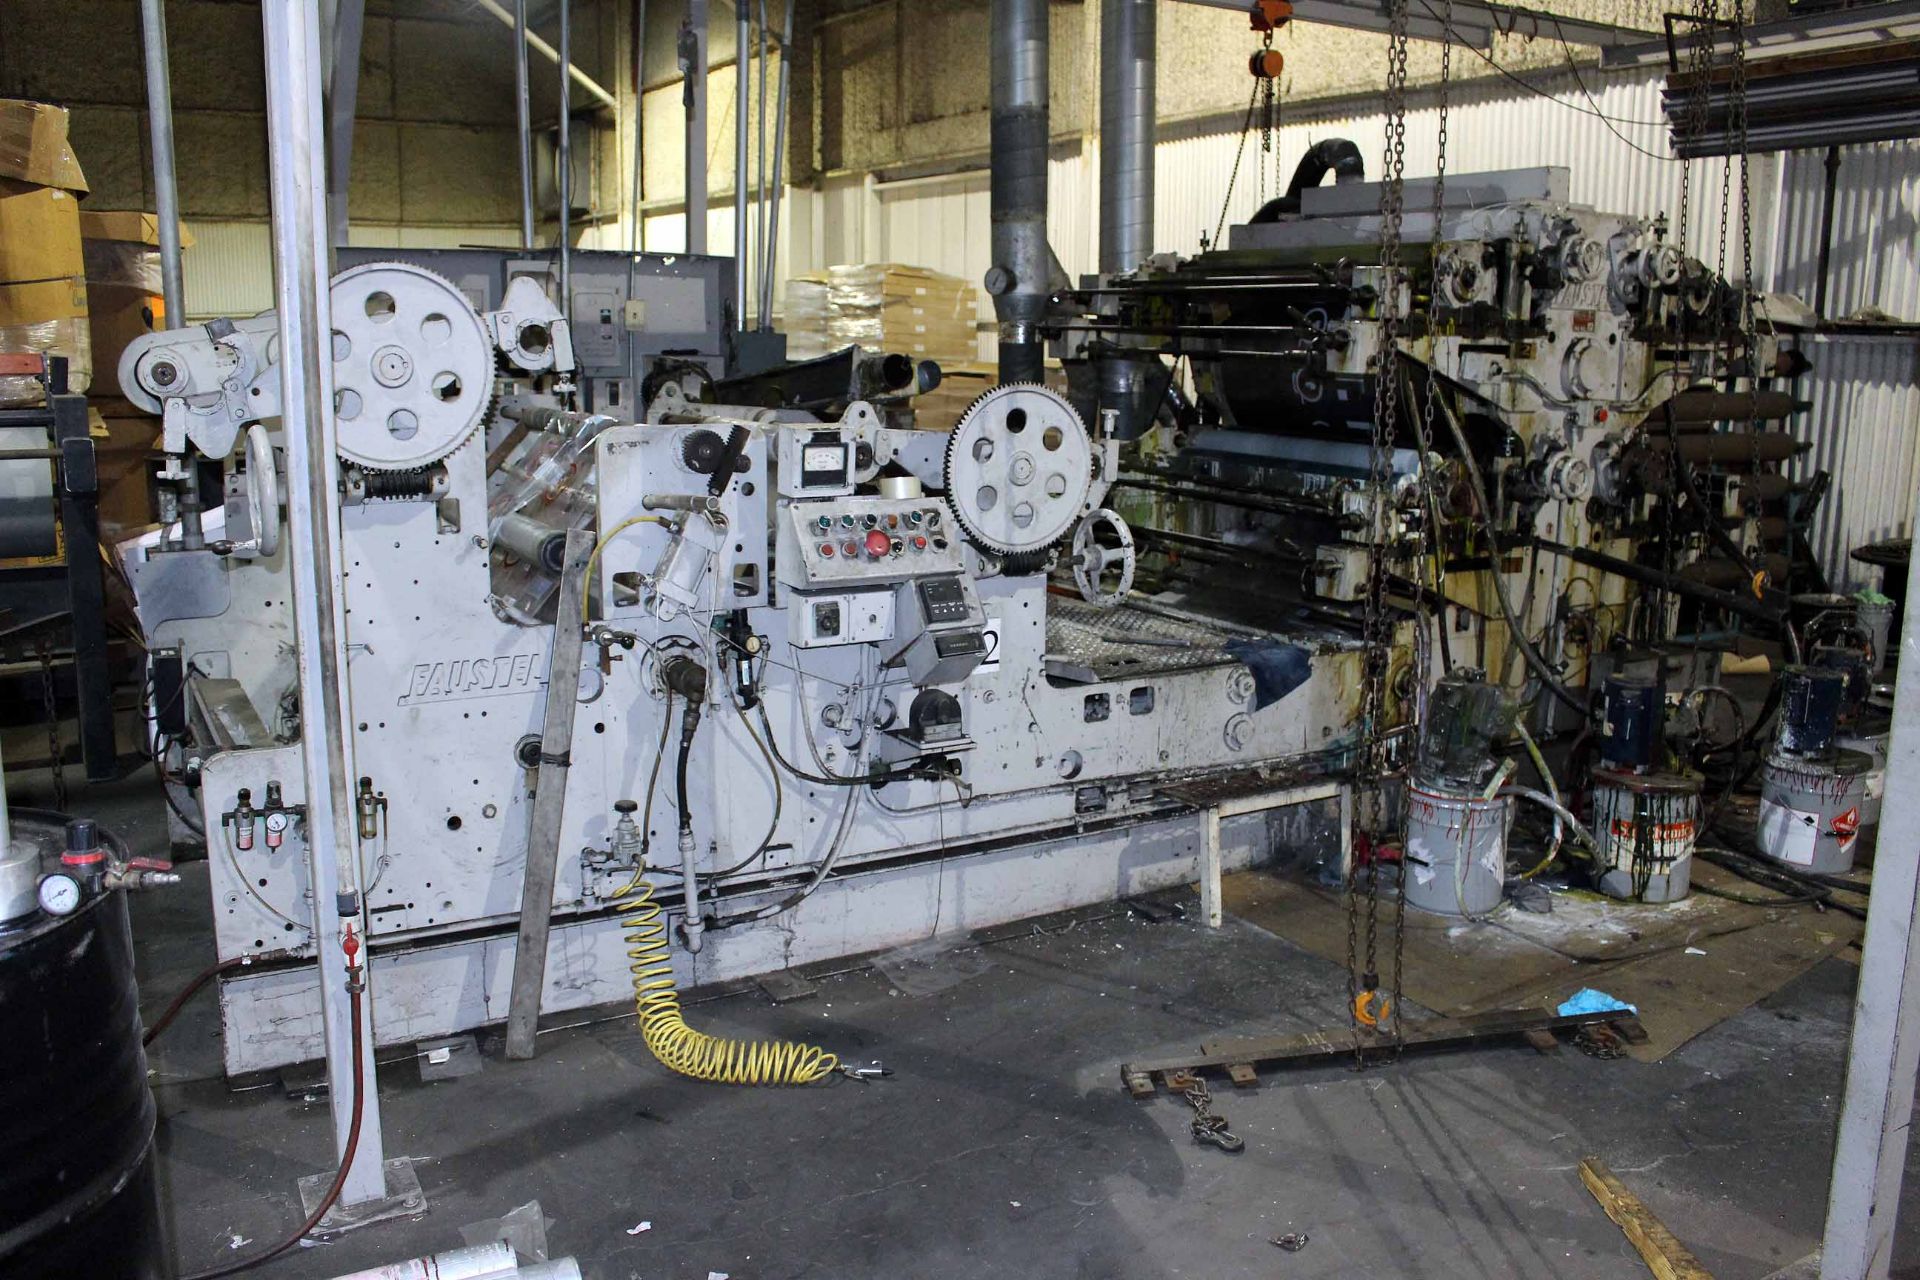 CI FLEXOGRAPHIC PRINTING PRESS, FAUSTEL MDL. E41-II, 44"W. cap., 4-color, fume exhaust blower - Image 3 of 7